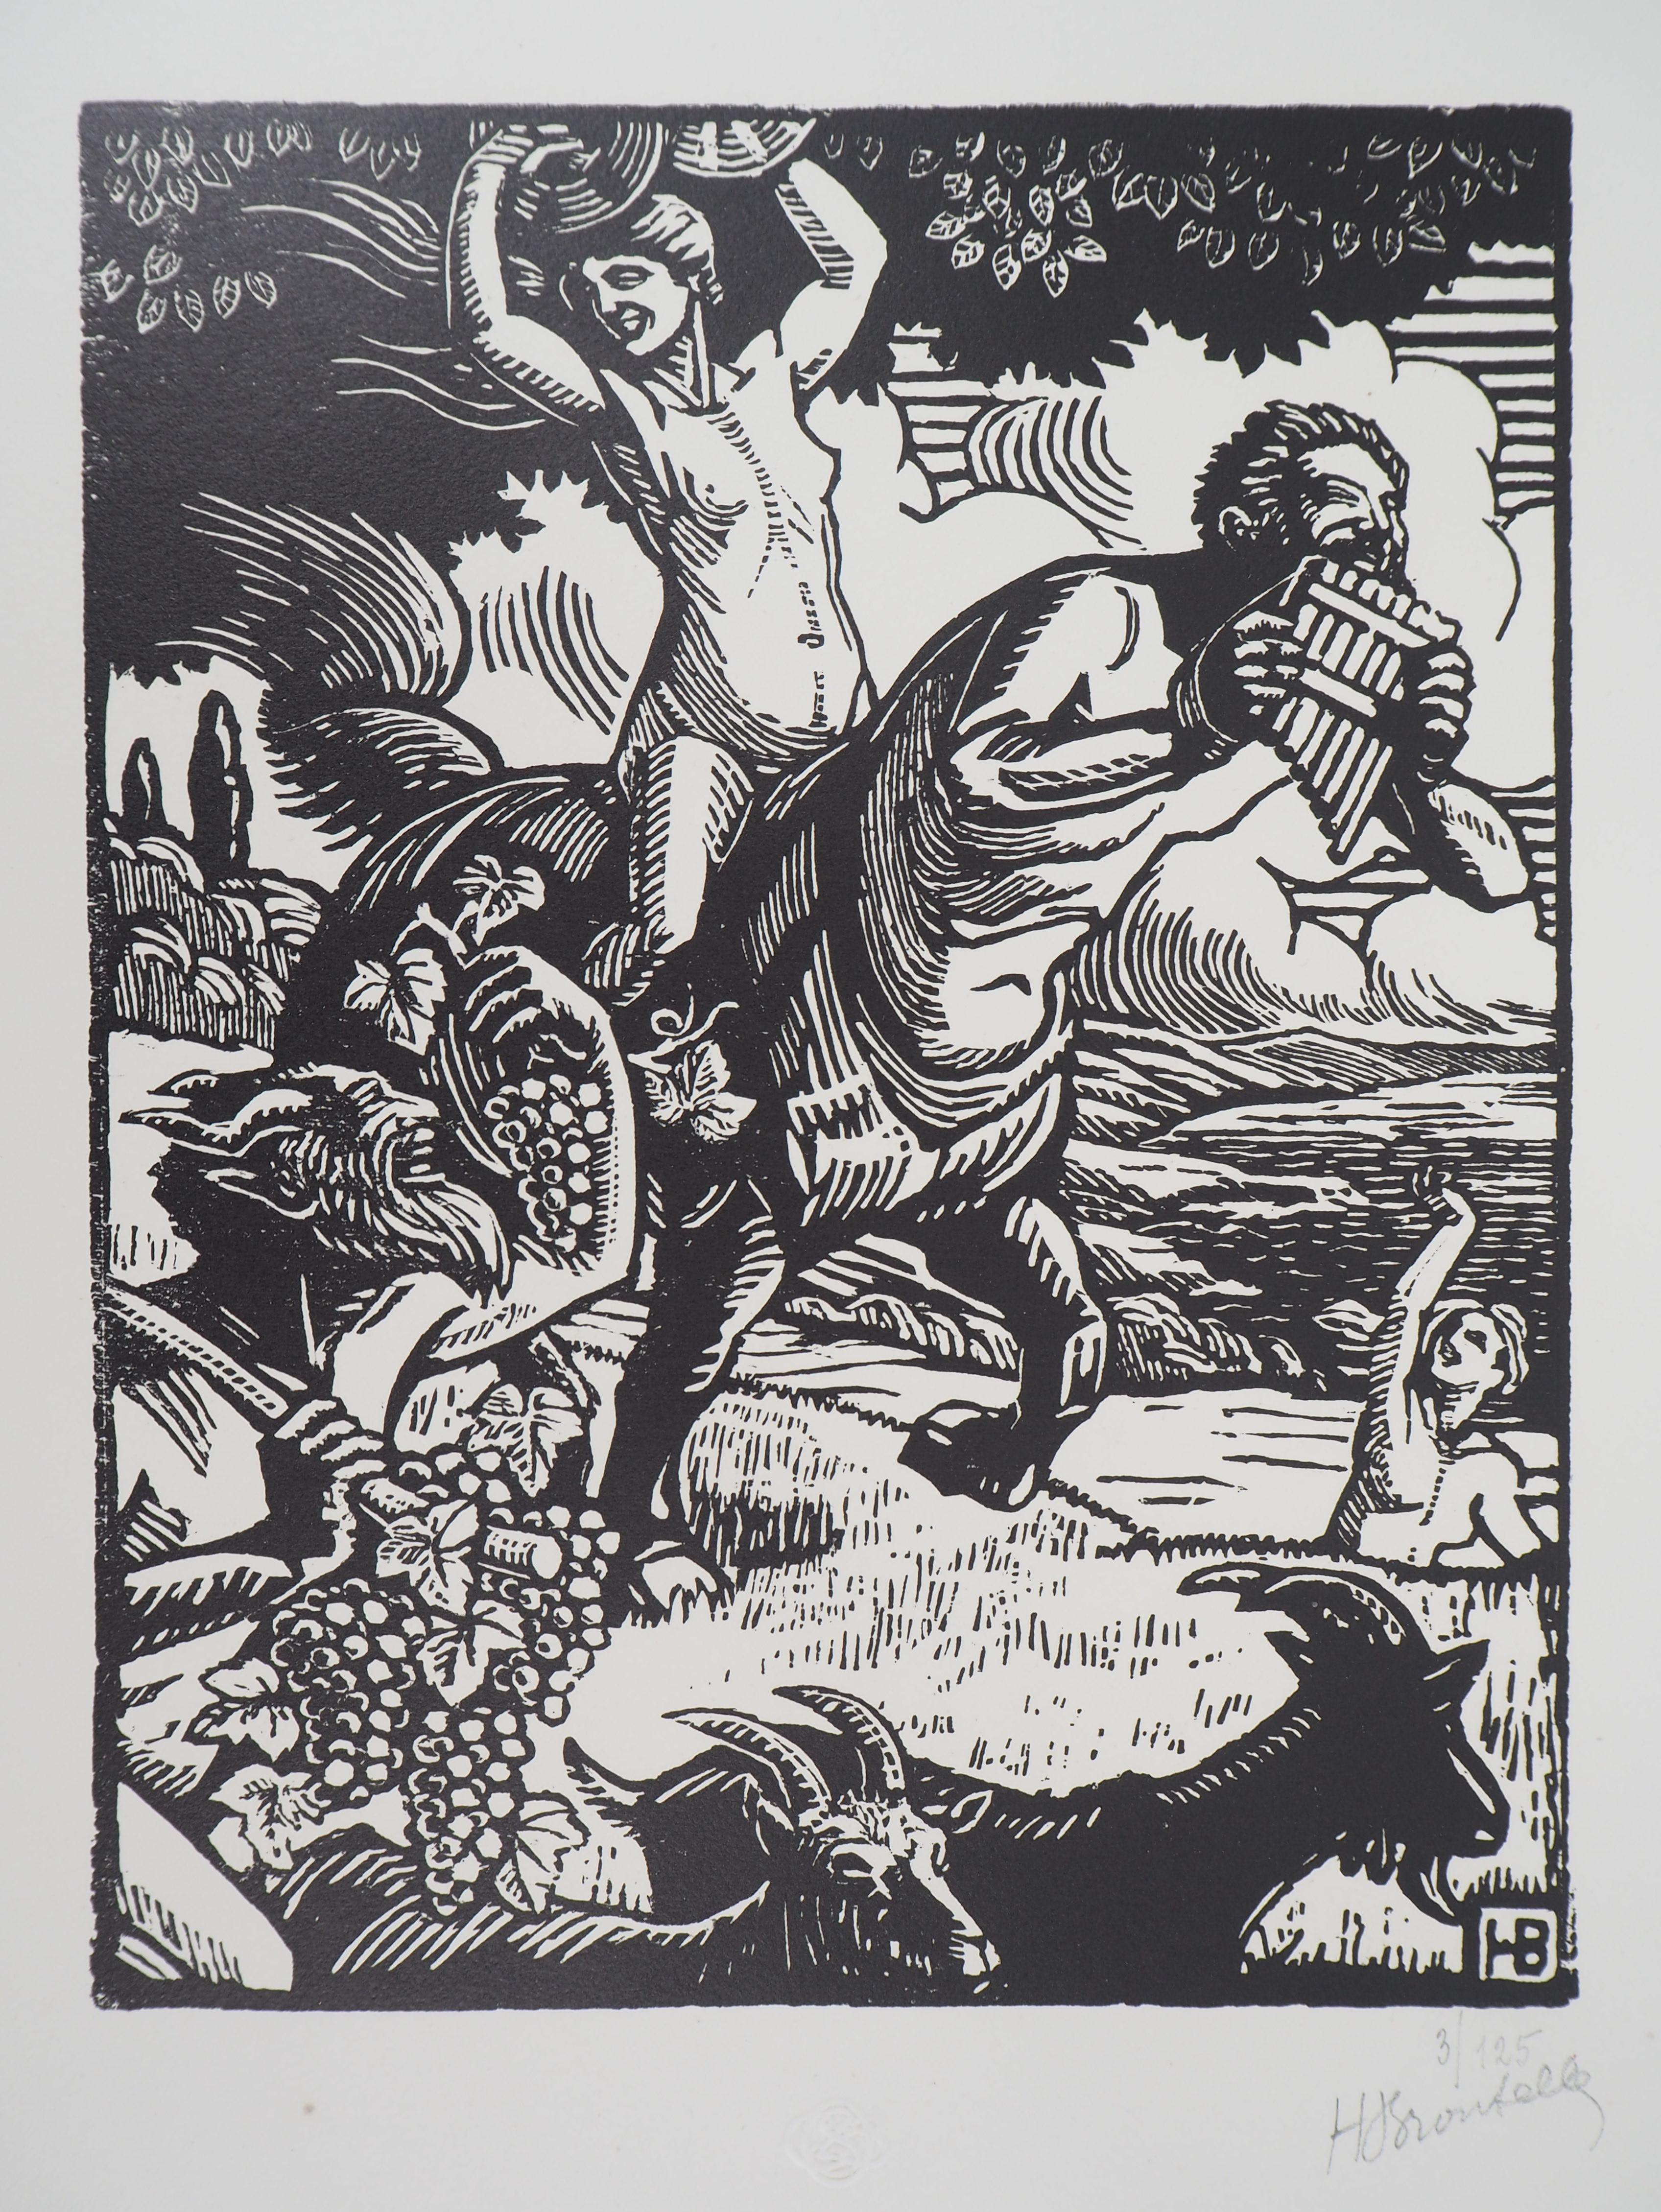 Honoré Broutelle Figurative Print - Mythology : Harvest with Bacchus, Fauna and Nymph - Original woodcut, Handsigned